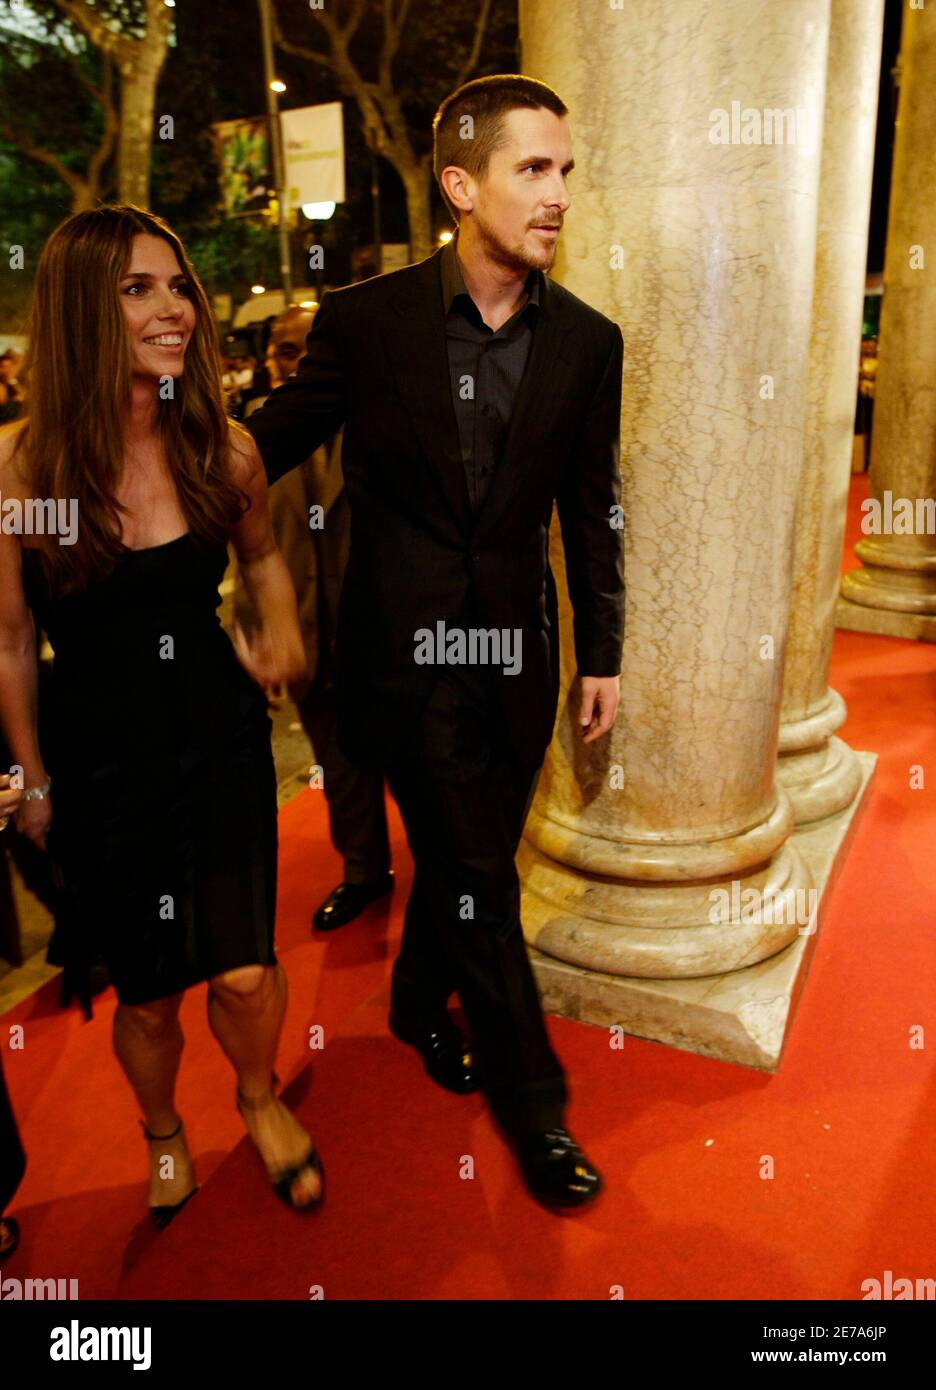 British actor Christian Bale and his wife Sandra ?Sibi? Blazic arrive at a  photocall for the movie "The Dark Knight" in central Barcelona July 23,  2008. REUTERS/Gustau Nacarino (SPAIN Stock Photo - Alamy